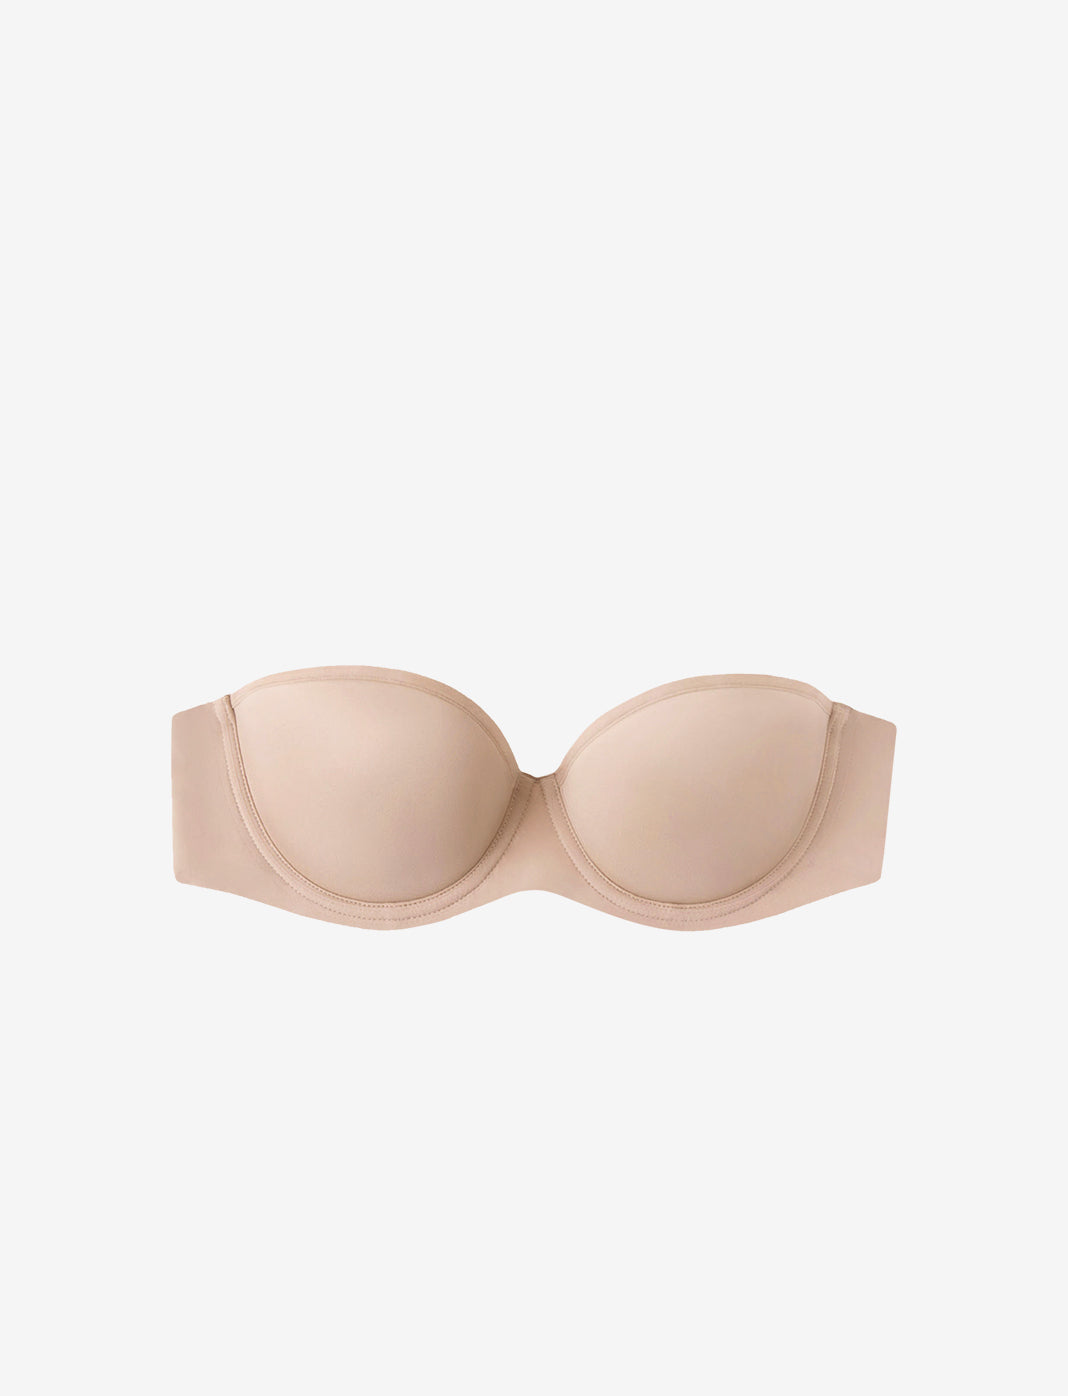 No-Wire Strapless Bra, Strapless Bras for Women Wireless Bra Without Straps  Comfortable Lightly Padded Bra Bralette Backless Breasts Padded C Nude 